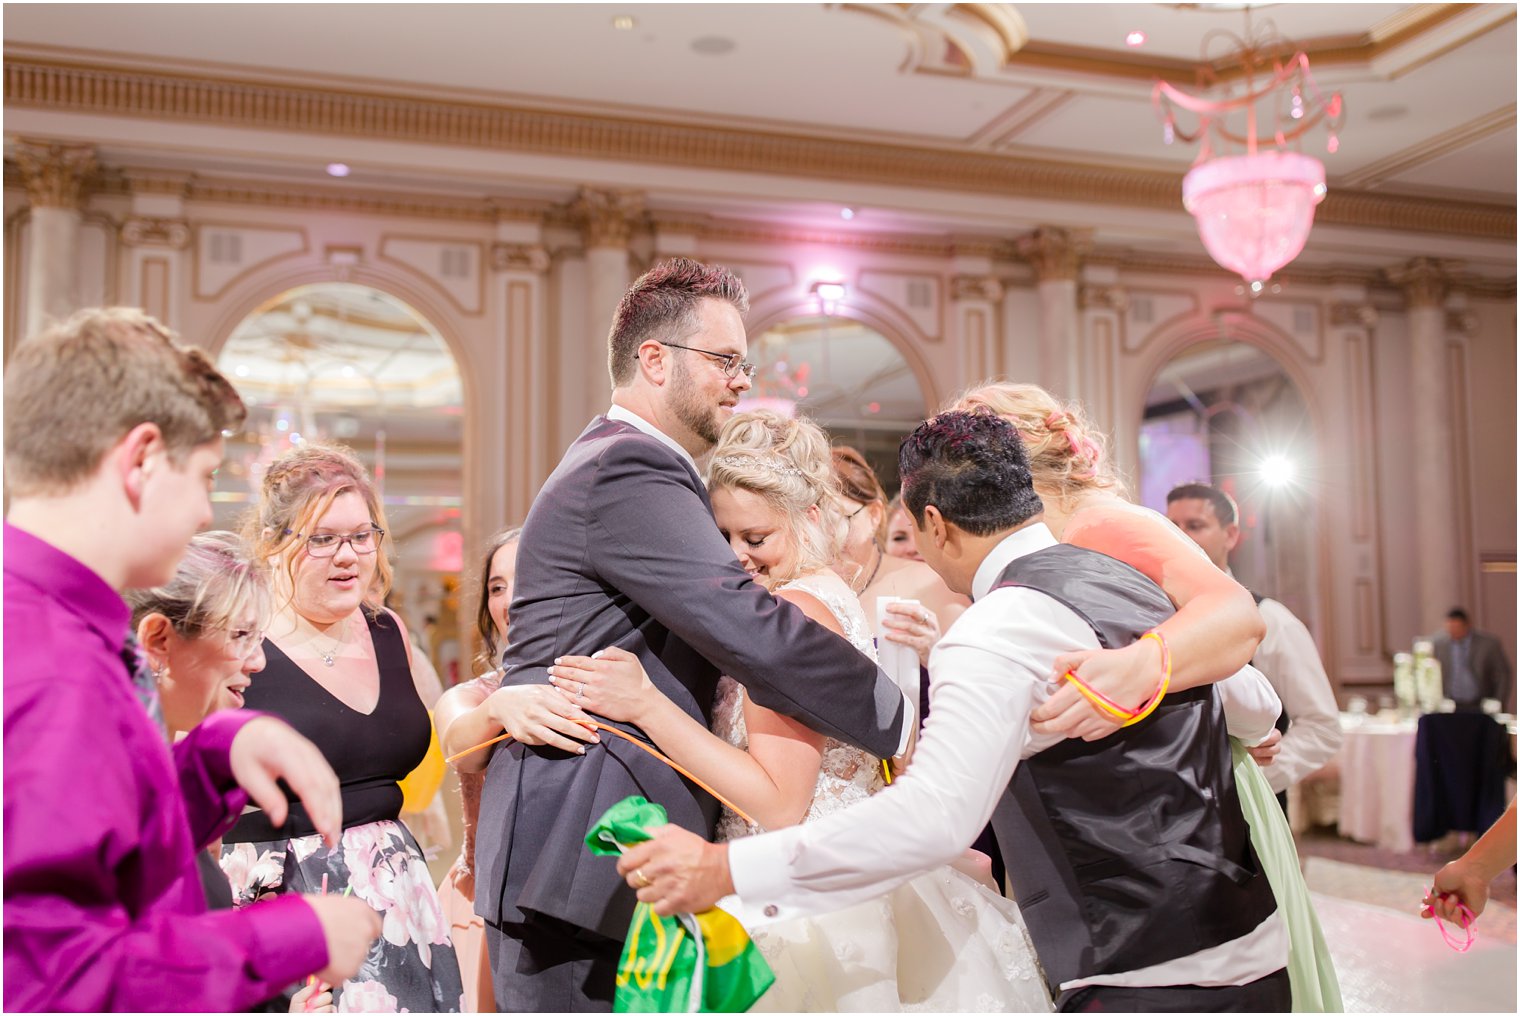 hugging during wedding reception at Legacy Castle photographed by Idalia Photography